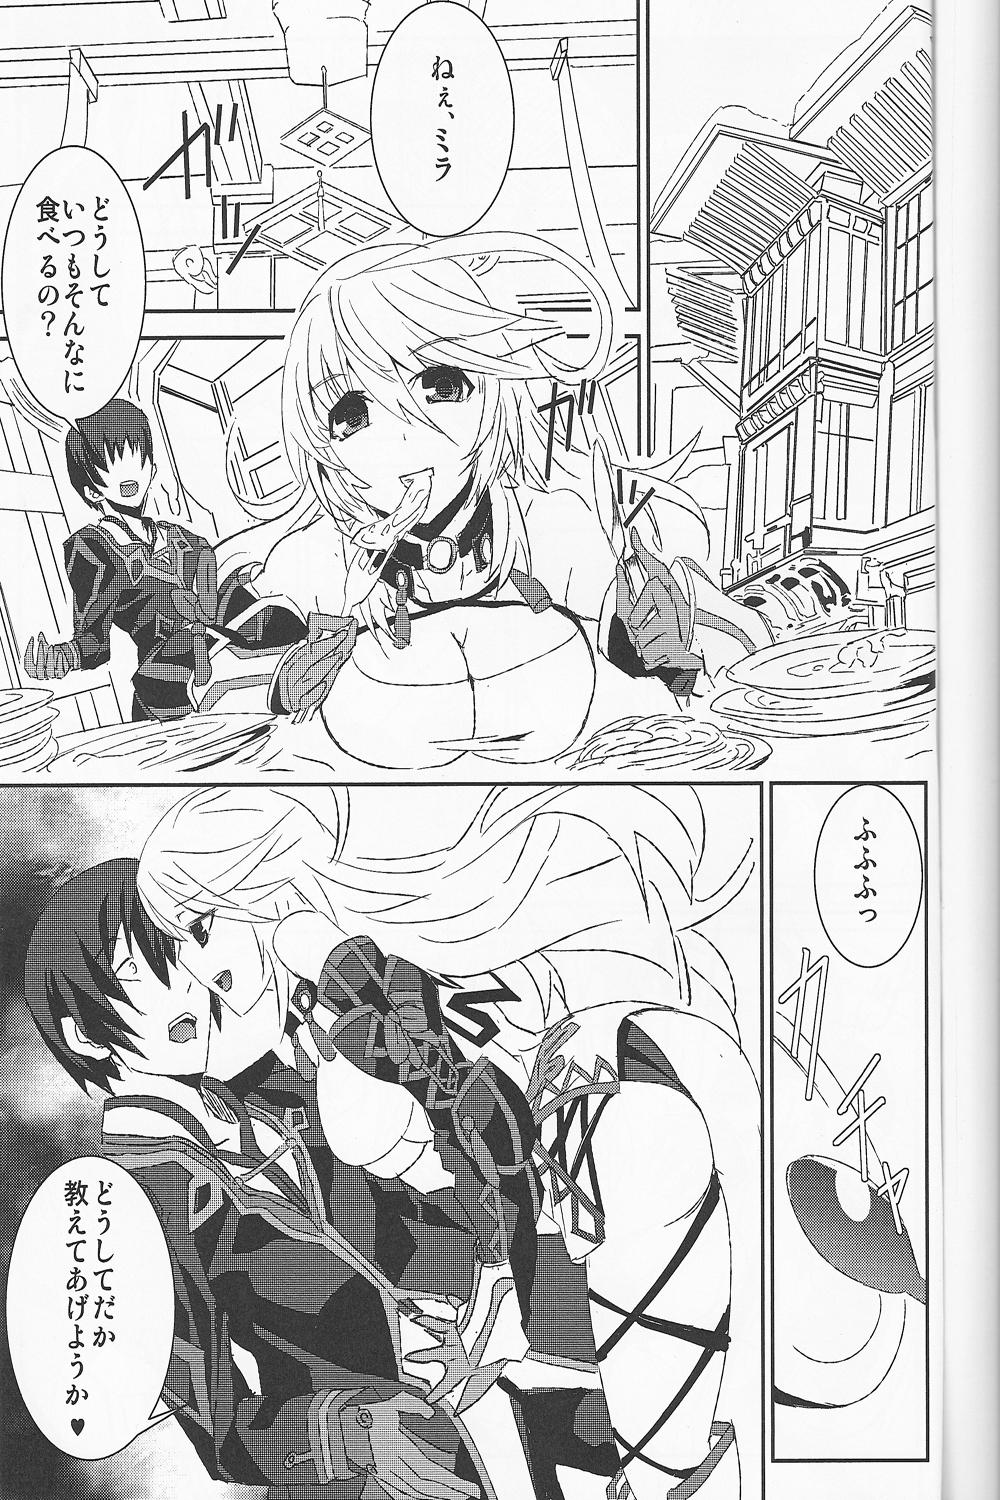 Climax Locus - Tales of xillia Assfuck - Page 2